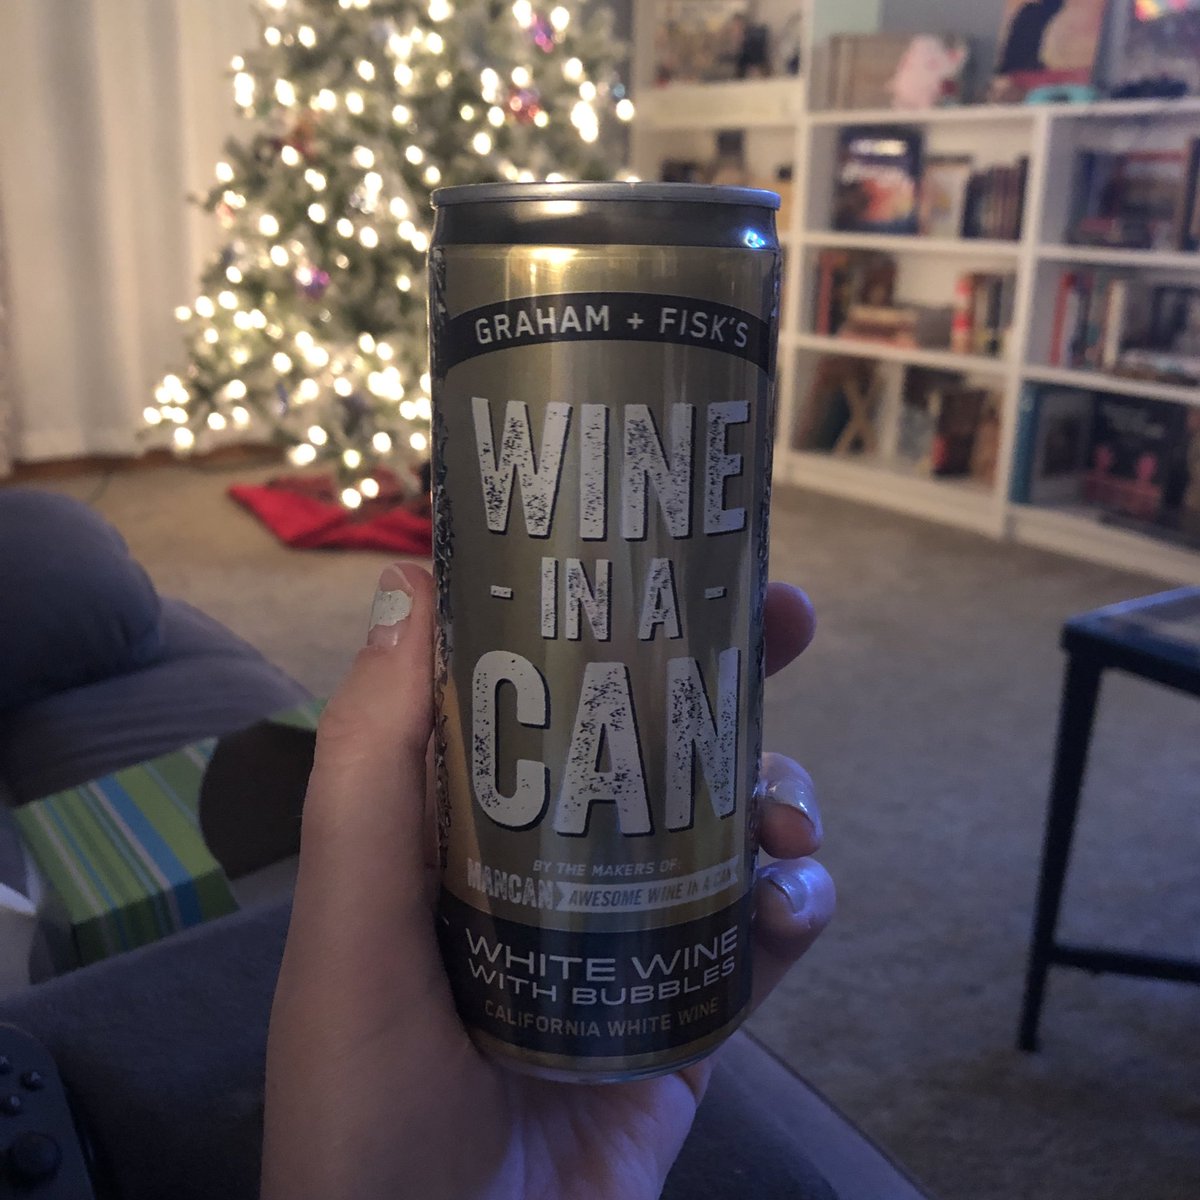 Starting the season with my first can from my advent calendar and the first seasonal program I will watch is the LEGO Star Wars Holiday Special. #25DaysOfChristmas #wineinacan